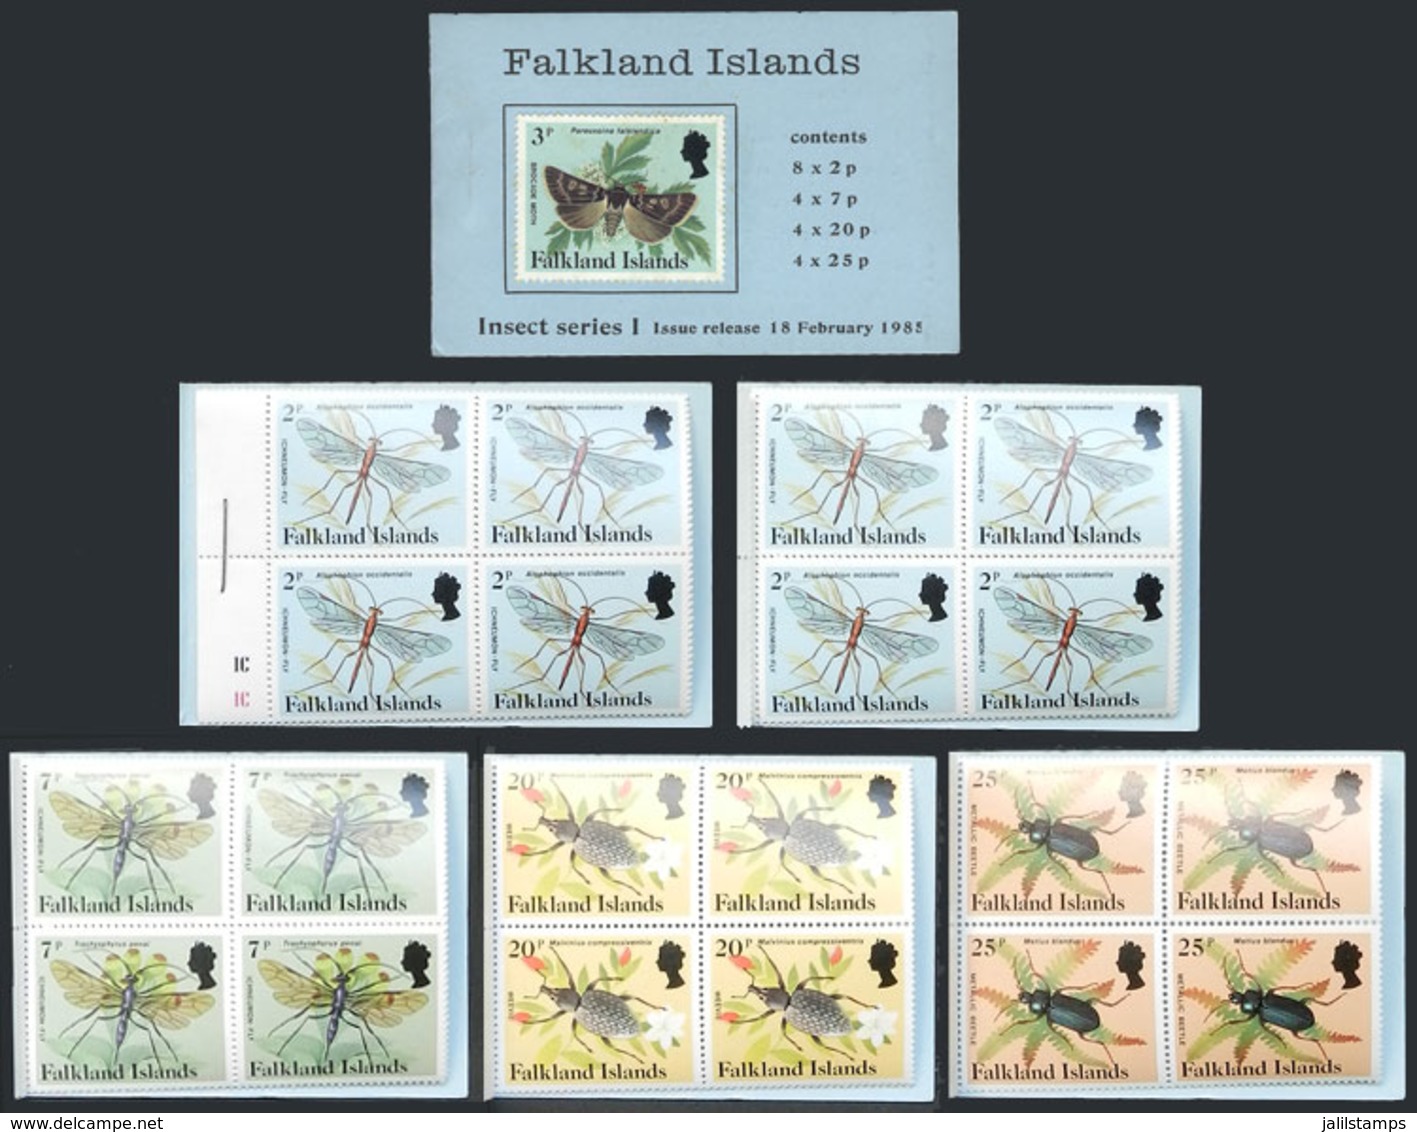 FALKLAND ISLANDS/MALVINAS: Yvert Booklet C404, 1985 Insects, Excellent Quality, Catalog Value Euros 30. - Falkland